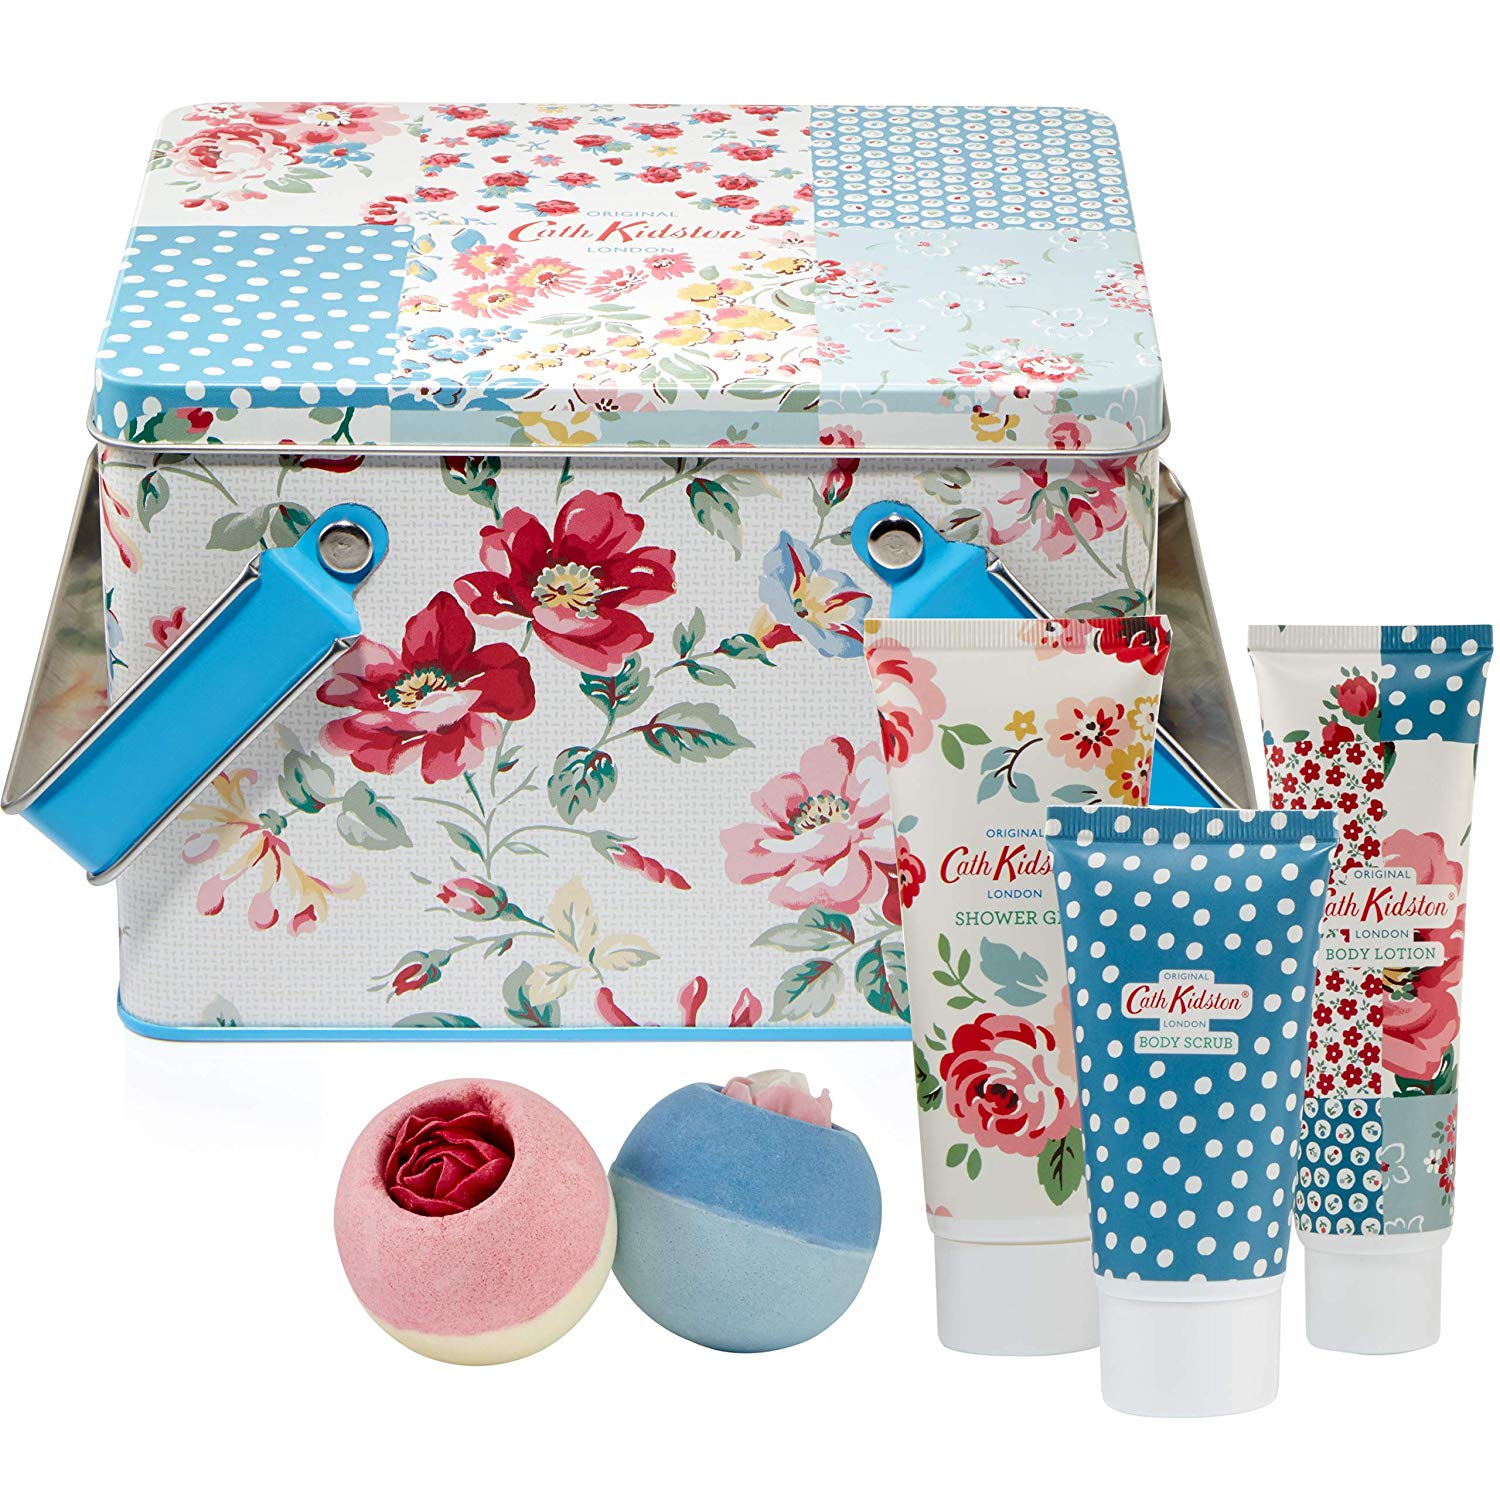 cath kidston gifts